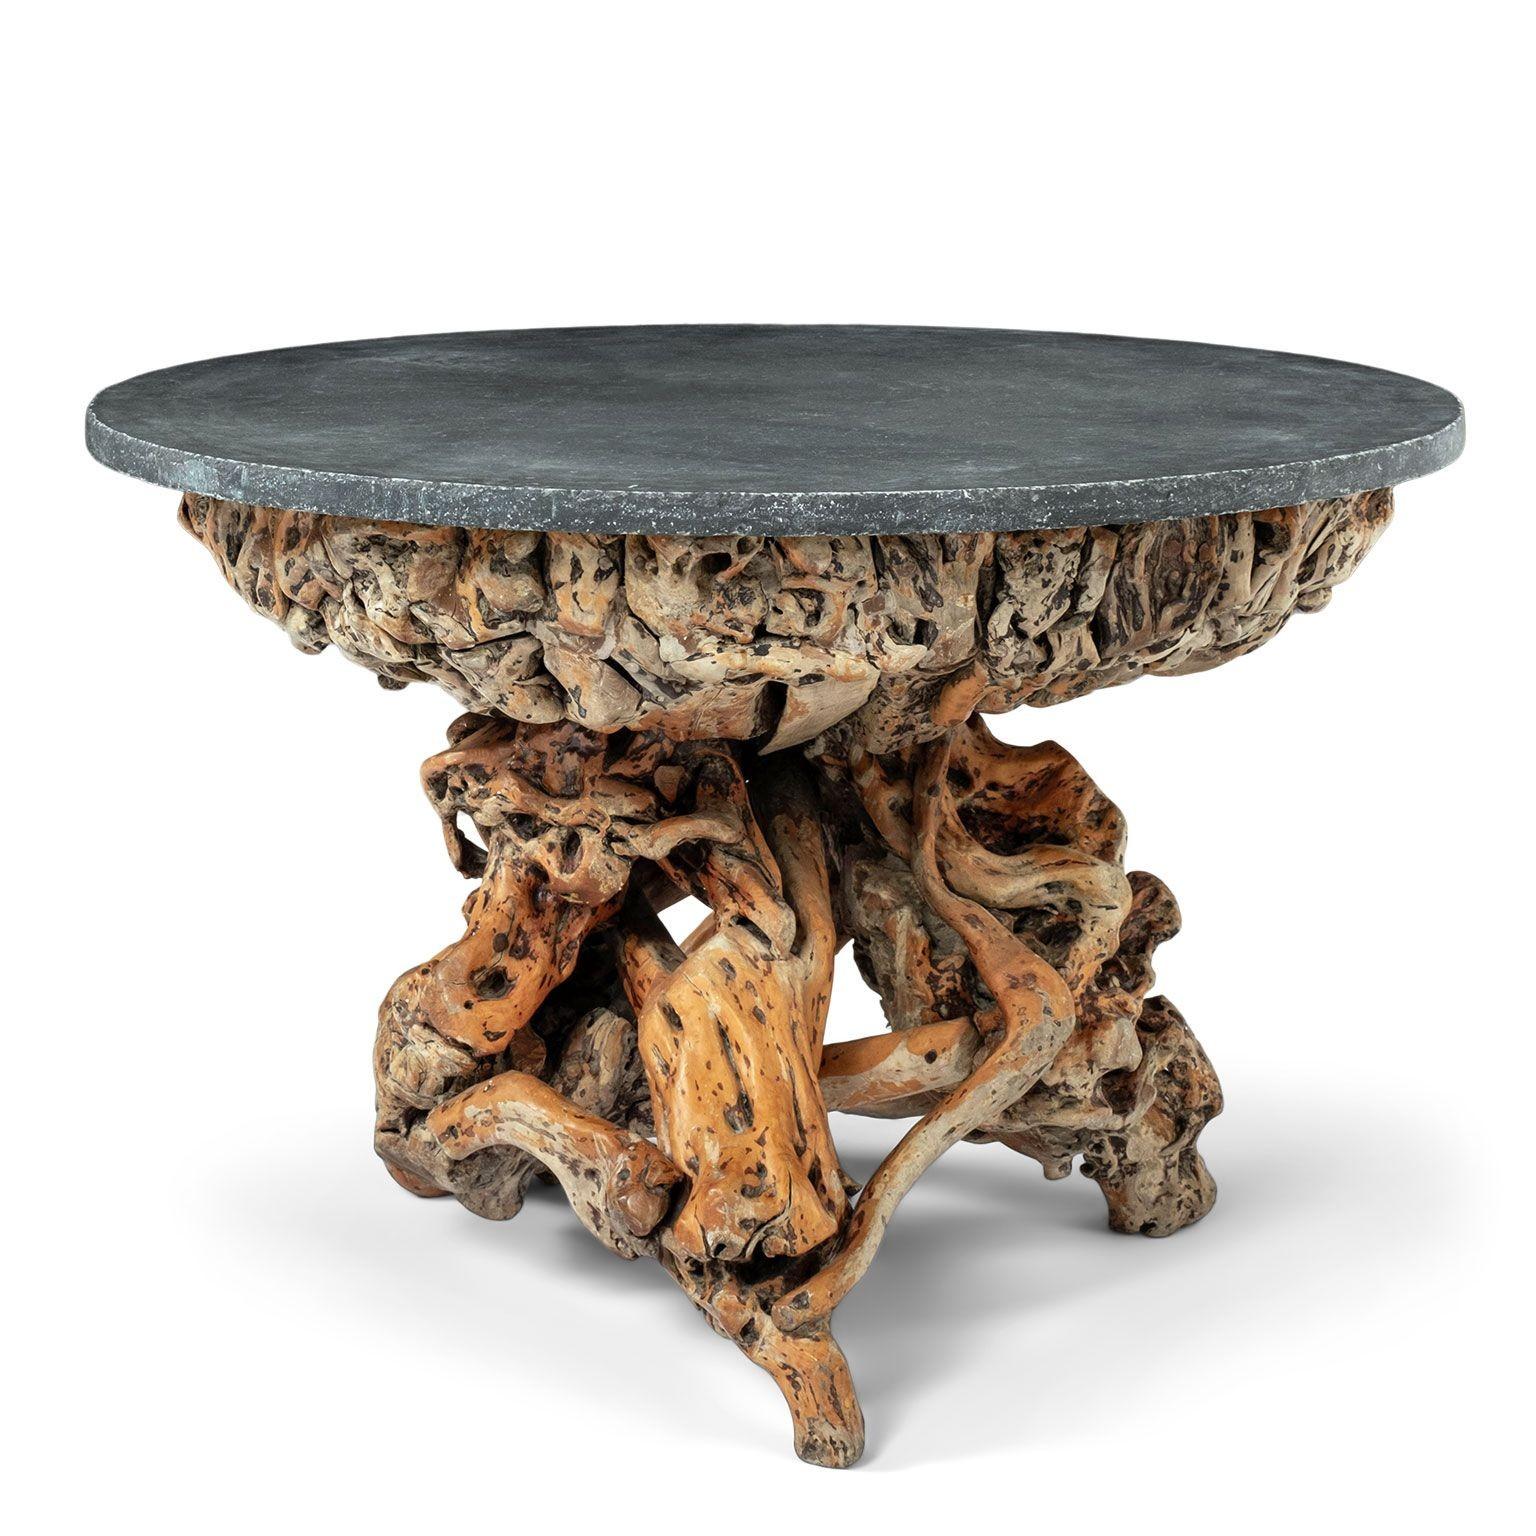 Round large-scale bluestone top root wood base table. Round straight-edge bluestone top raised upon a natural-shaped base of root wood finished in varying shades of brown.

Note: Original/early finish on antique and vintage metal will include some,